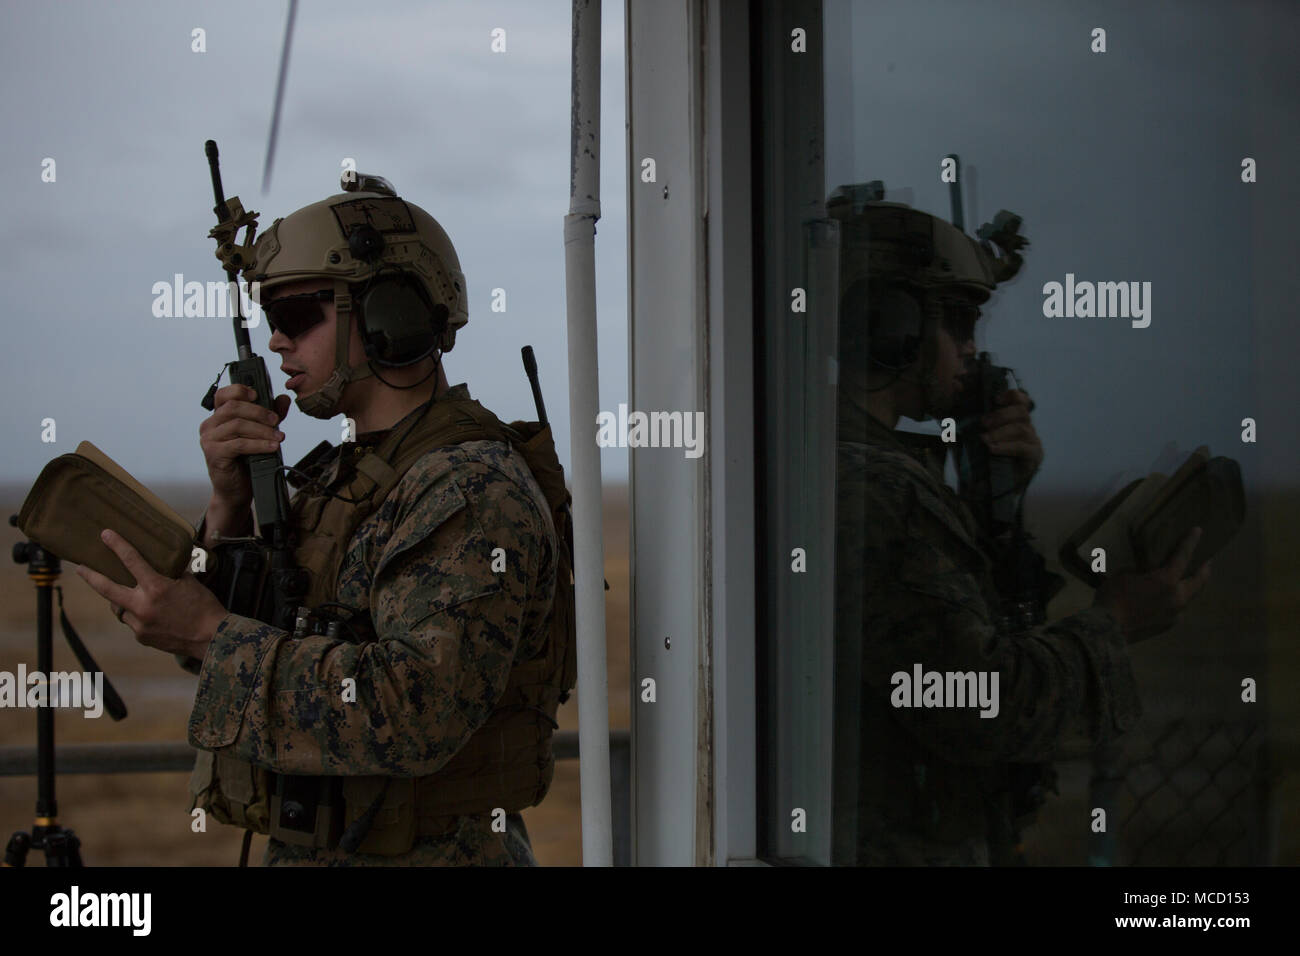 Captain Michael Valdez, an air officer with 2nd Air Naval Gunfire Liaison Company, radios to aircraft pilots during close air-support drills at an aircraft attack range on Piney Island, North Carolina, Feb. 7, 2018. The Marines practiced making flight and attack plans for the pilots depending on specific situations. (U.S. Marine Corps photo by Lance Cpl. Ashley McLaughlin) Stock Photo